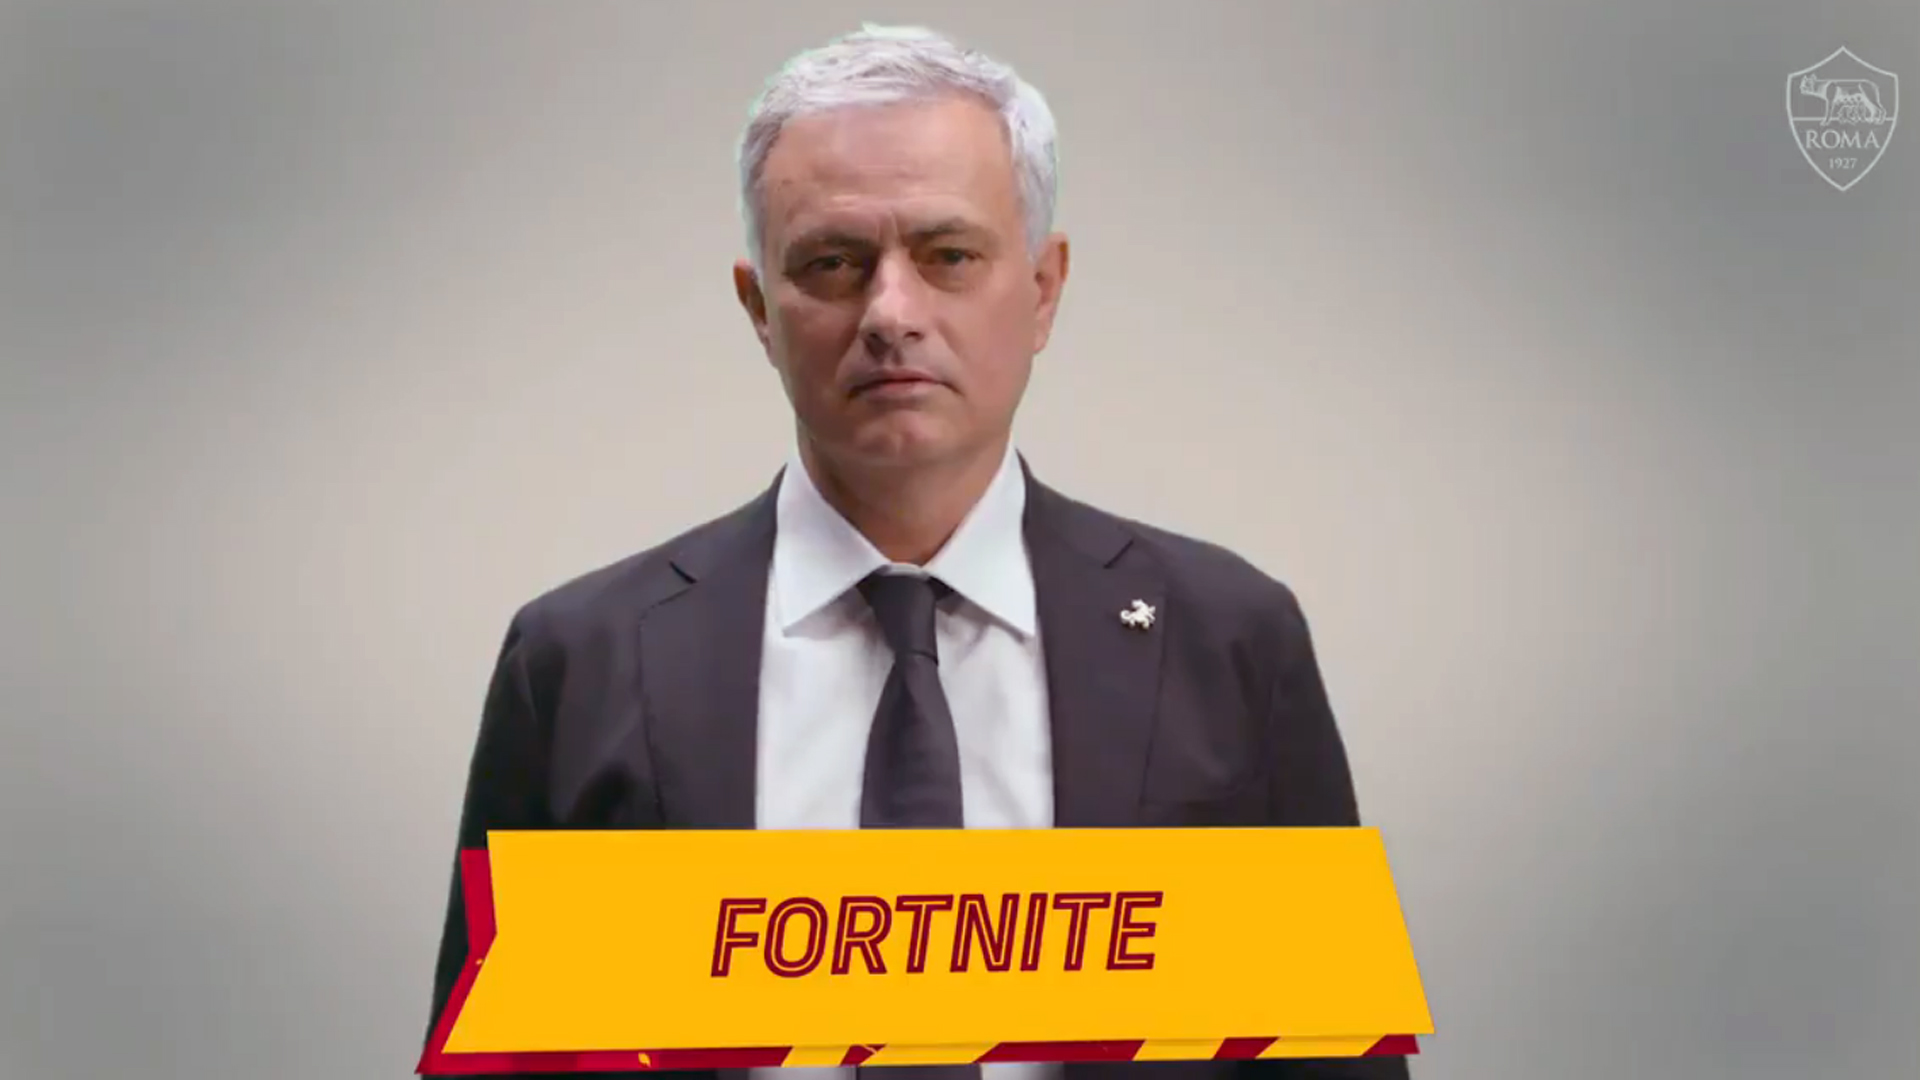 José Mourinho blames Fortnite for keeping his players up all night